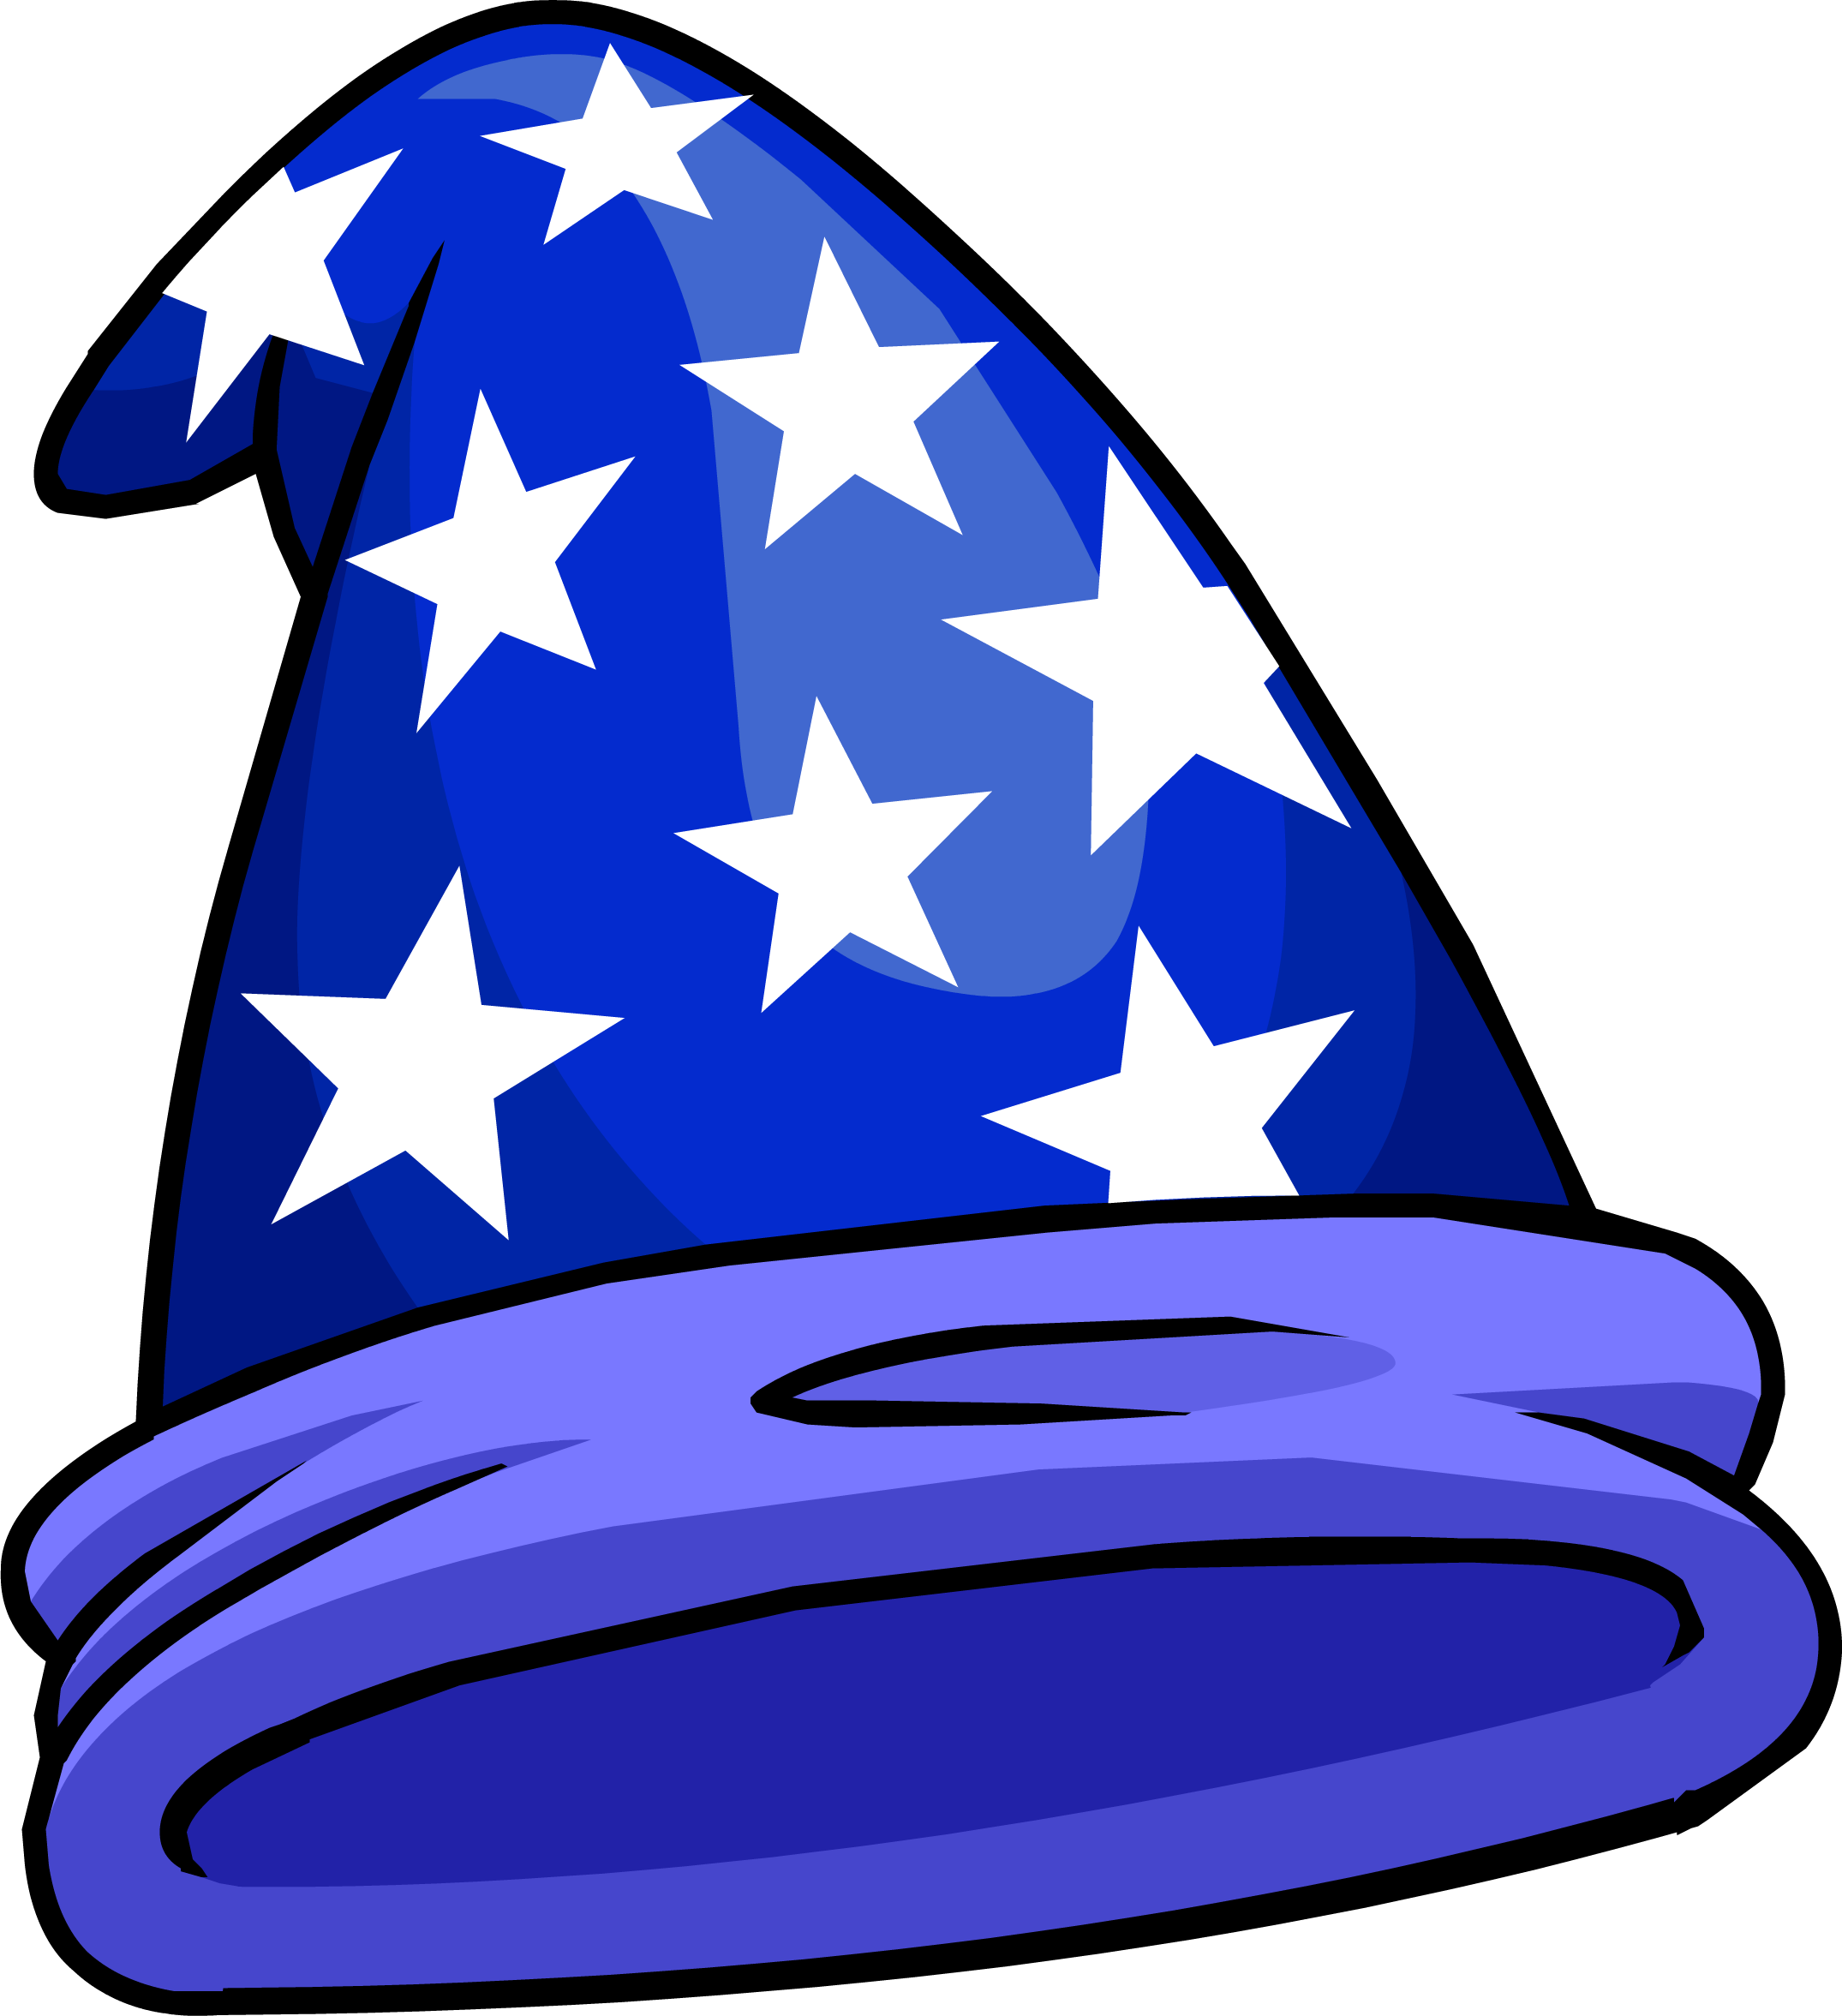 wizard hat clipart - photo #15